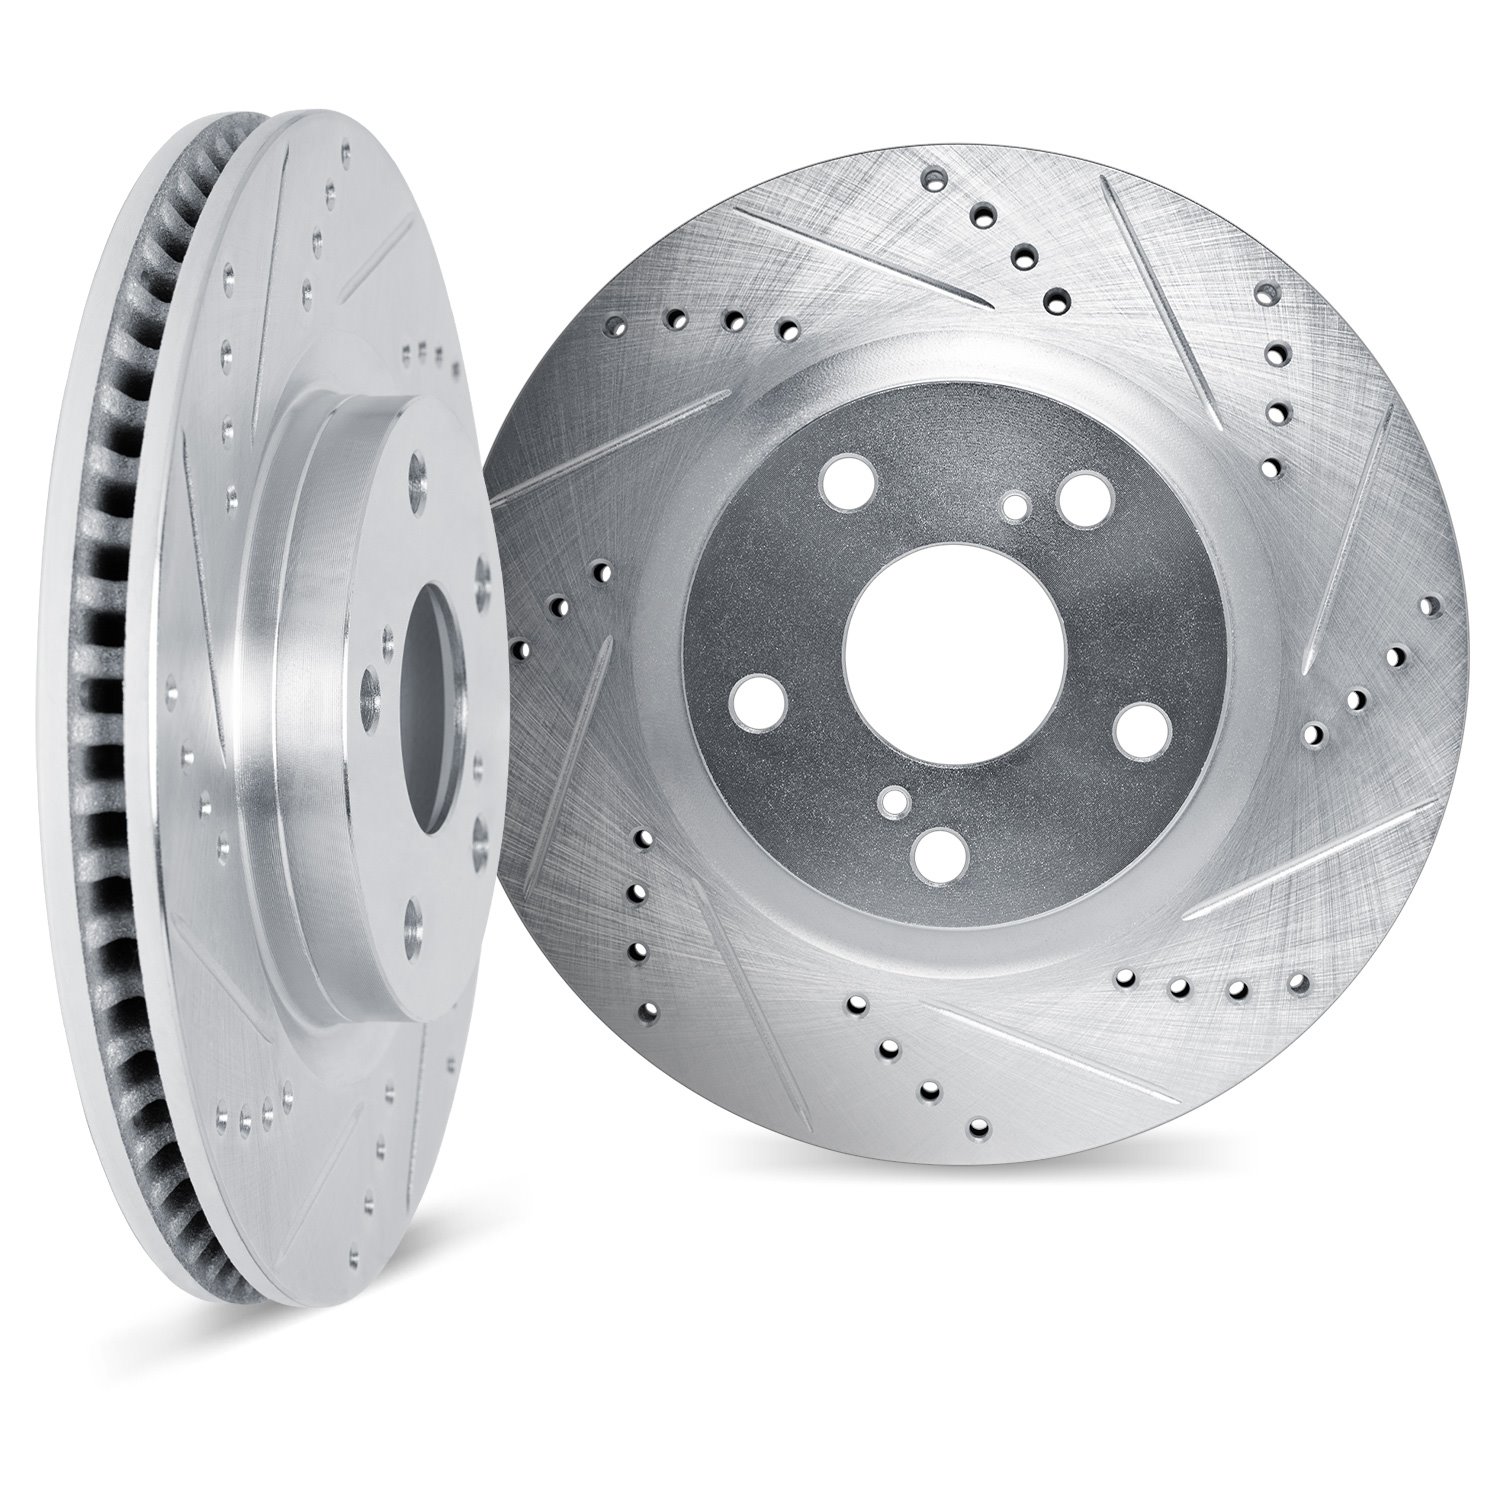 7002-59071 Drilled/Slotted Brake Rotors [Silver], Fits Select Acura/Honda, Position: Front